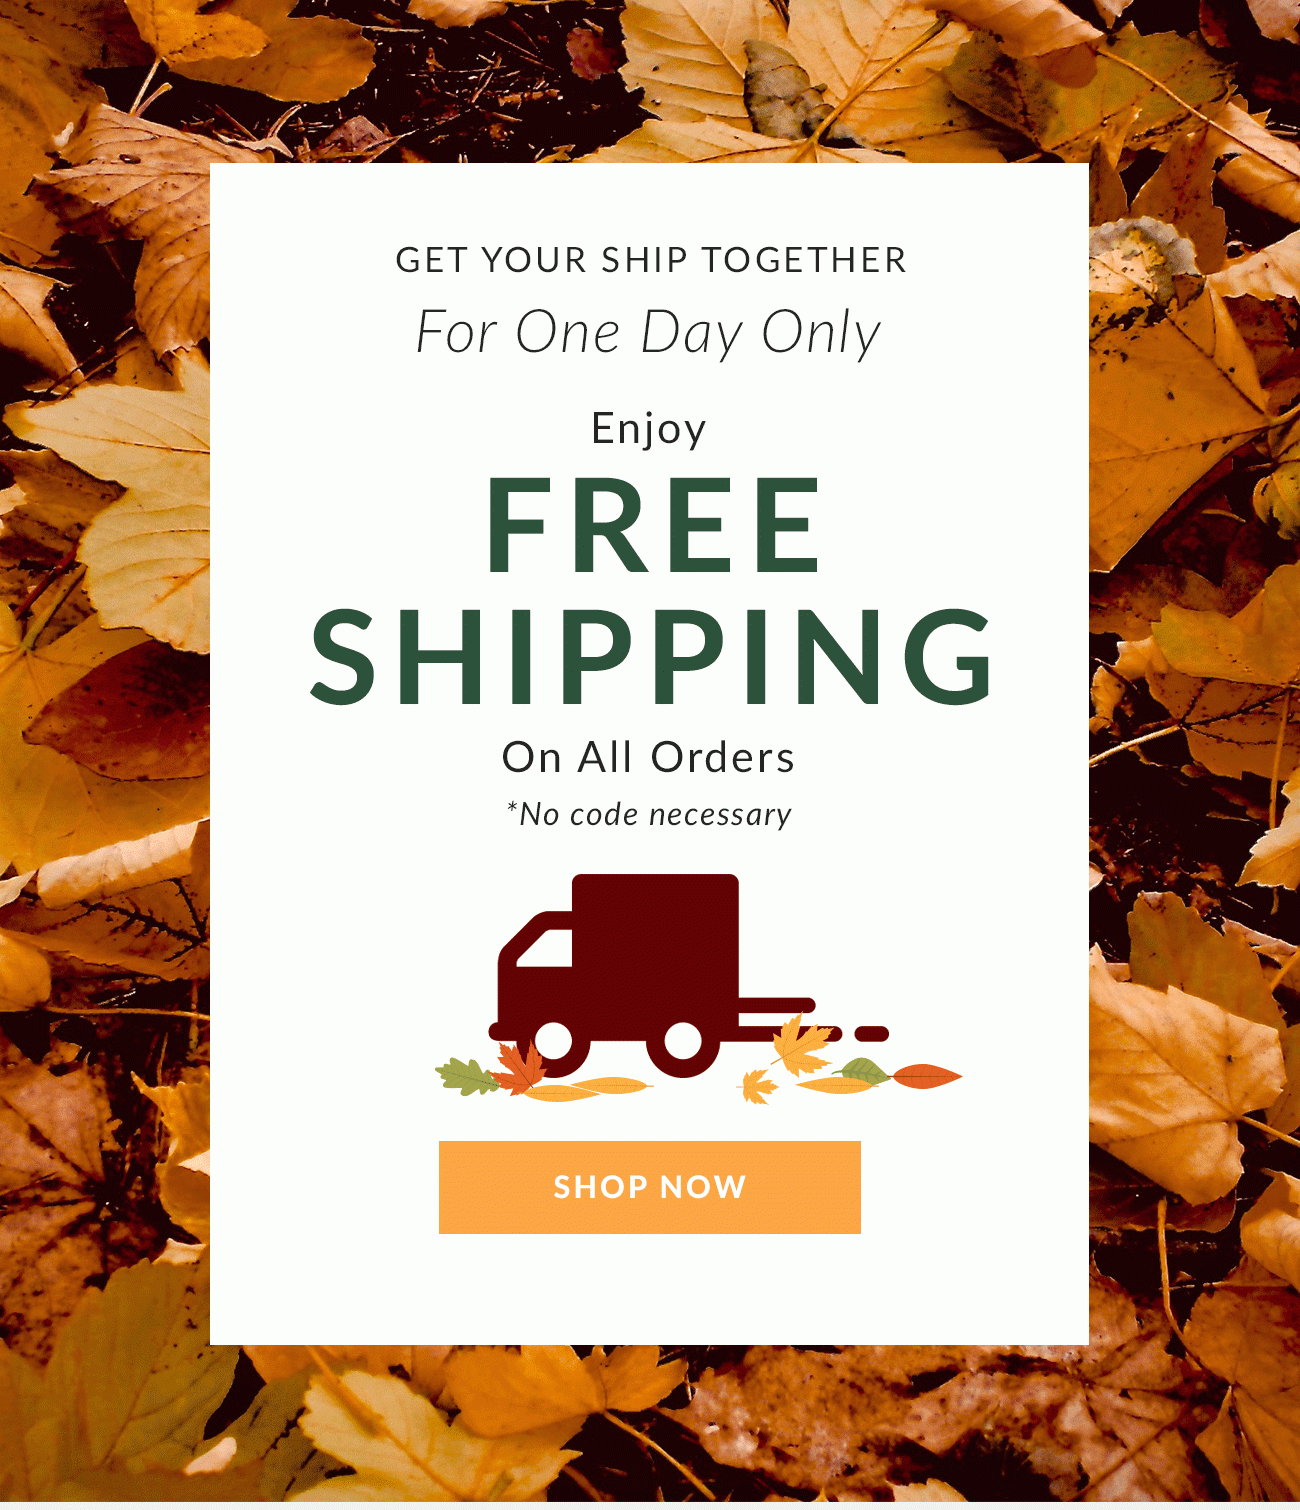 For One Day Only Enjoy Free Shipping On All Orders - Shop Now